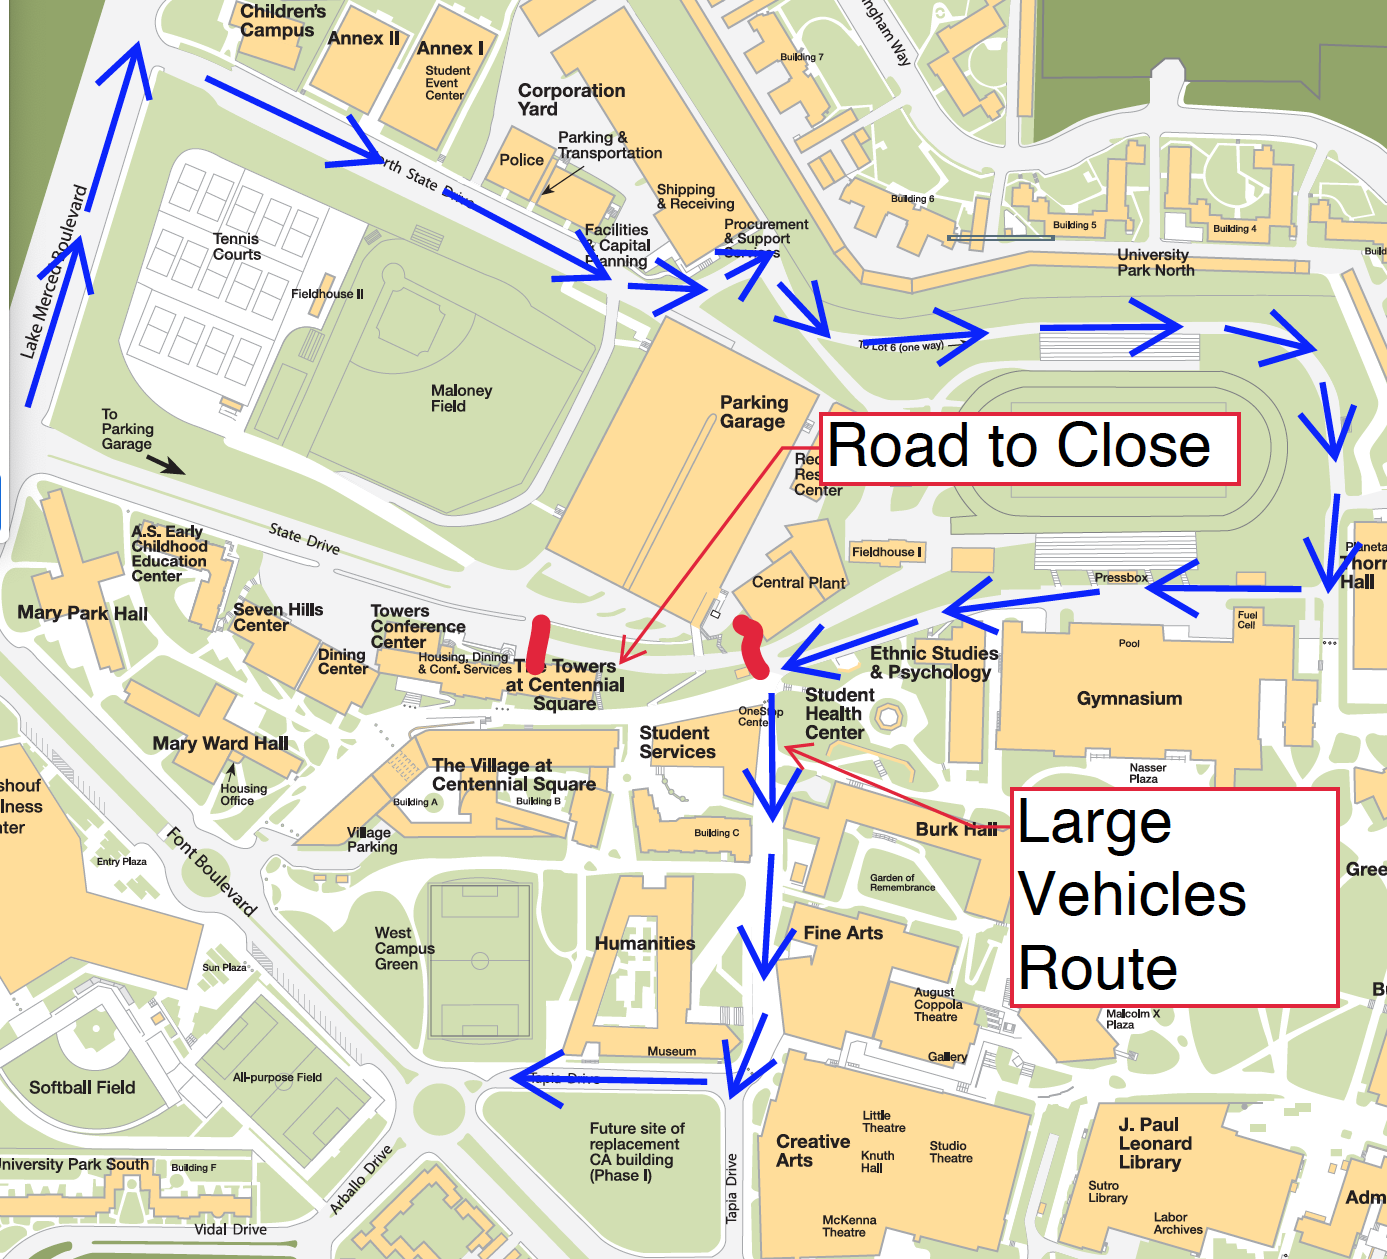 Campus map showing alt route via the North State Drive back road towards Tapia St